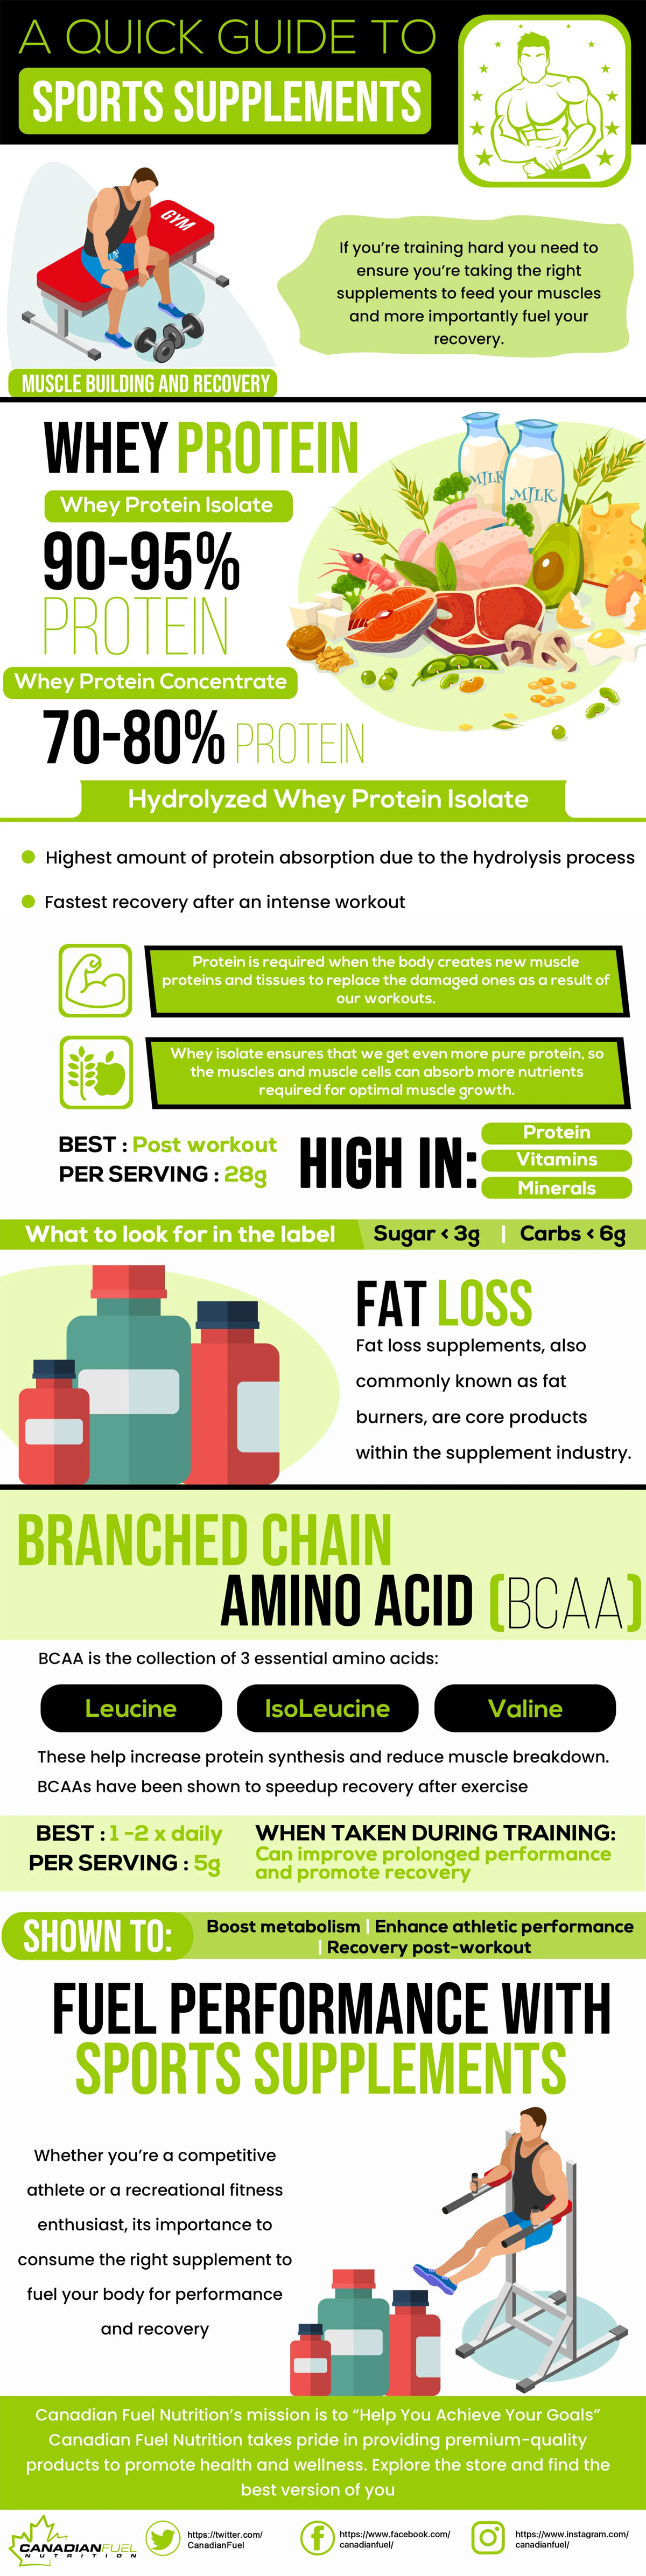 A Quick Guide To Sports Supplements